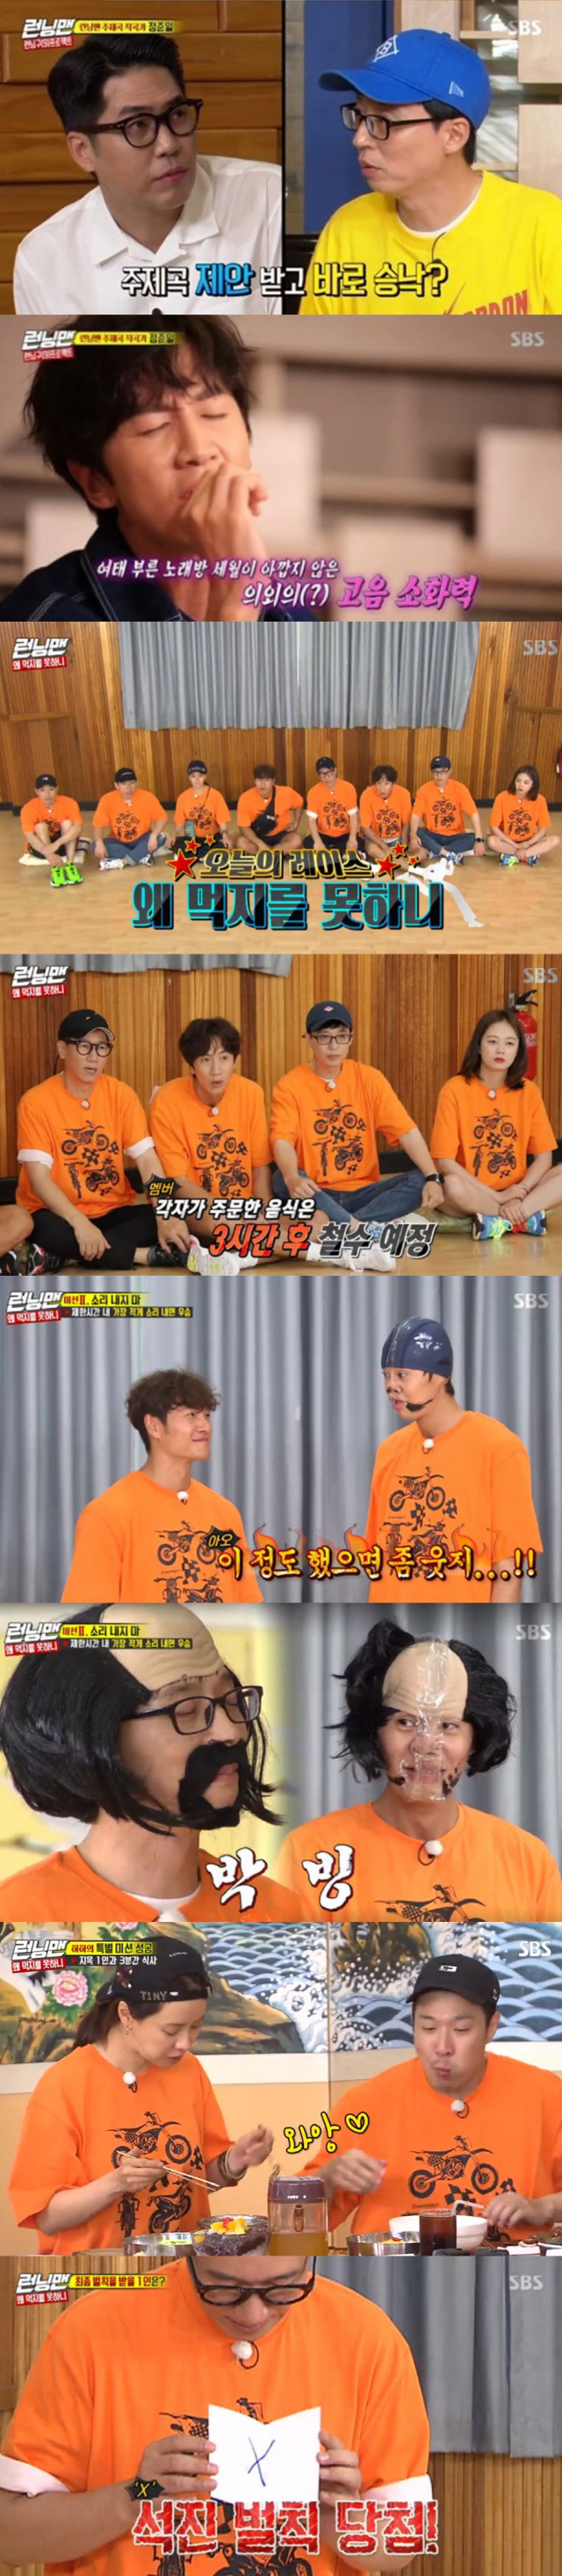 SBS Running Man took the first place in the same time zone of 2049 target audience rating which was strong during the holiday season.According to Nielsen Korea, the ratings agency Running Man broadcast on the 4th soared to 7.4% of the highest audience rating per minute, and the 2049 target audience rating, which is an important indicator of major advertising officials, recorded 3.1% (based on the second part of the metropolitan areas audience rating), surpassing Masked Wang and The boss ear is the donkey ear all.On this day, singer Jeong Joon-Il, who will be a composer of the theme song Running Man, appeared and attracted attention.Jeong Joon-Il said, I liked Running Man and accepted it when I received the theme song proposal.The members cheered, Its really good, and raised expectations for the theme song Running Man that will be combined with the lyrics of the members.In addition, on the day of the broadcast, Why can not I eat Race was also conducted.It was a mission to eat the food in front of you for a long time, but as the fate was decided by the bobbok card, a fierce competition between the members was held.Especially, the second round mission, Do not make a sound, should not make a sound. In a long time, the Makeup Show was held and laughed. In addition, Choi Soo-in, who shines in the National Athletics Competition 2, participated in the event.On the other hand, Haha and Song Ji-hyo succeeded in eating as a result of the race final, and this scene was the highest audience rating of 7.4% per minute, best one minute.Ji Seok-jin won the penalty and will perform a makeup show when he appears as a guest at the Running Man fan meeting Running District held on the 26th (Mon).In Running Man, the 9th anniversary domestic fan meeting Running District is receiving the application for audience participation through the official website until 10th.More information can be found on the Running Man official website.